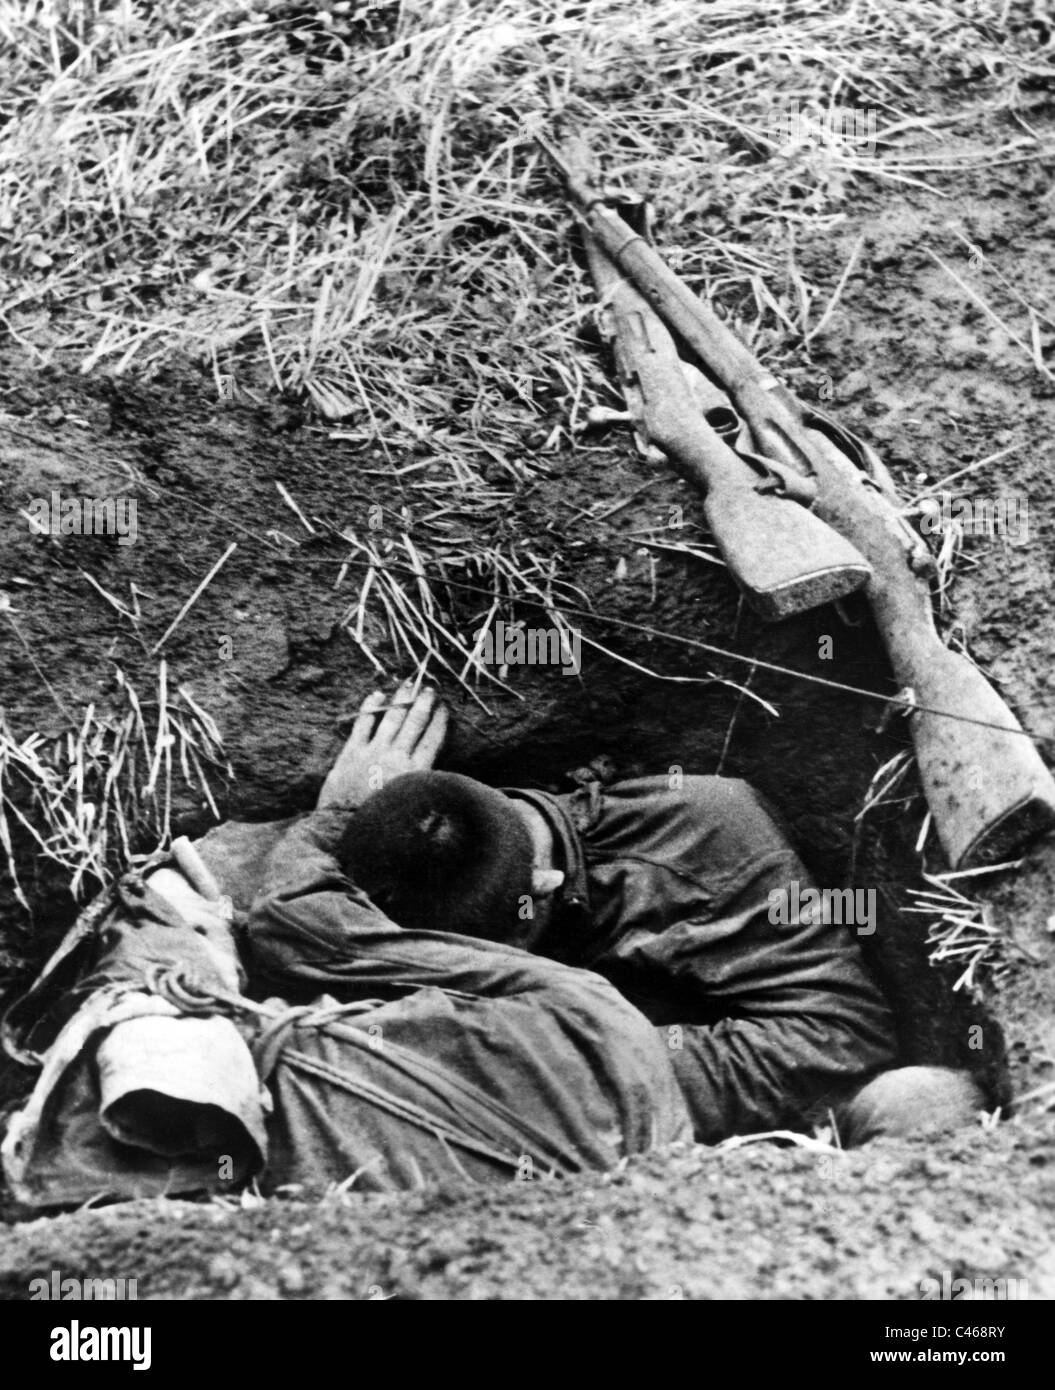 Second World War: Dead soldiers of the Red Army on the Eastern Front Stock Photo